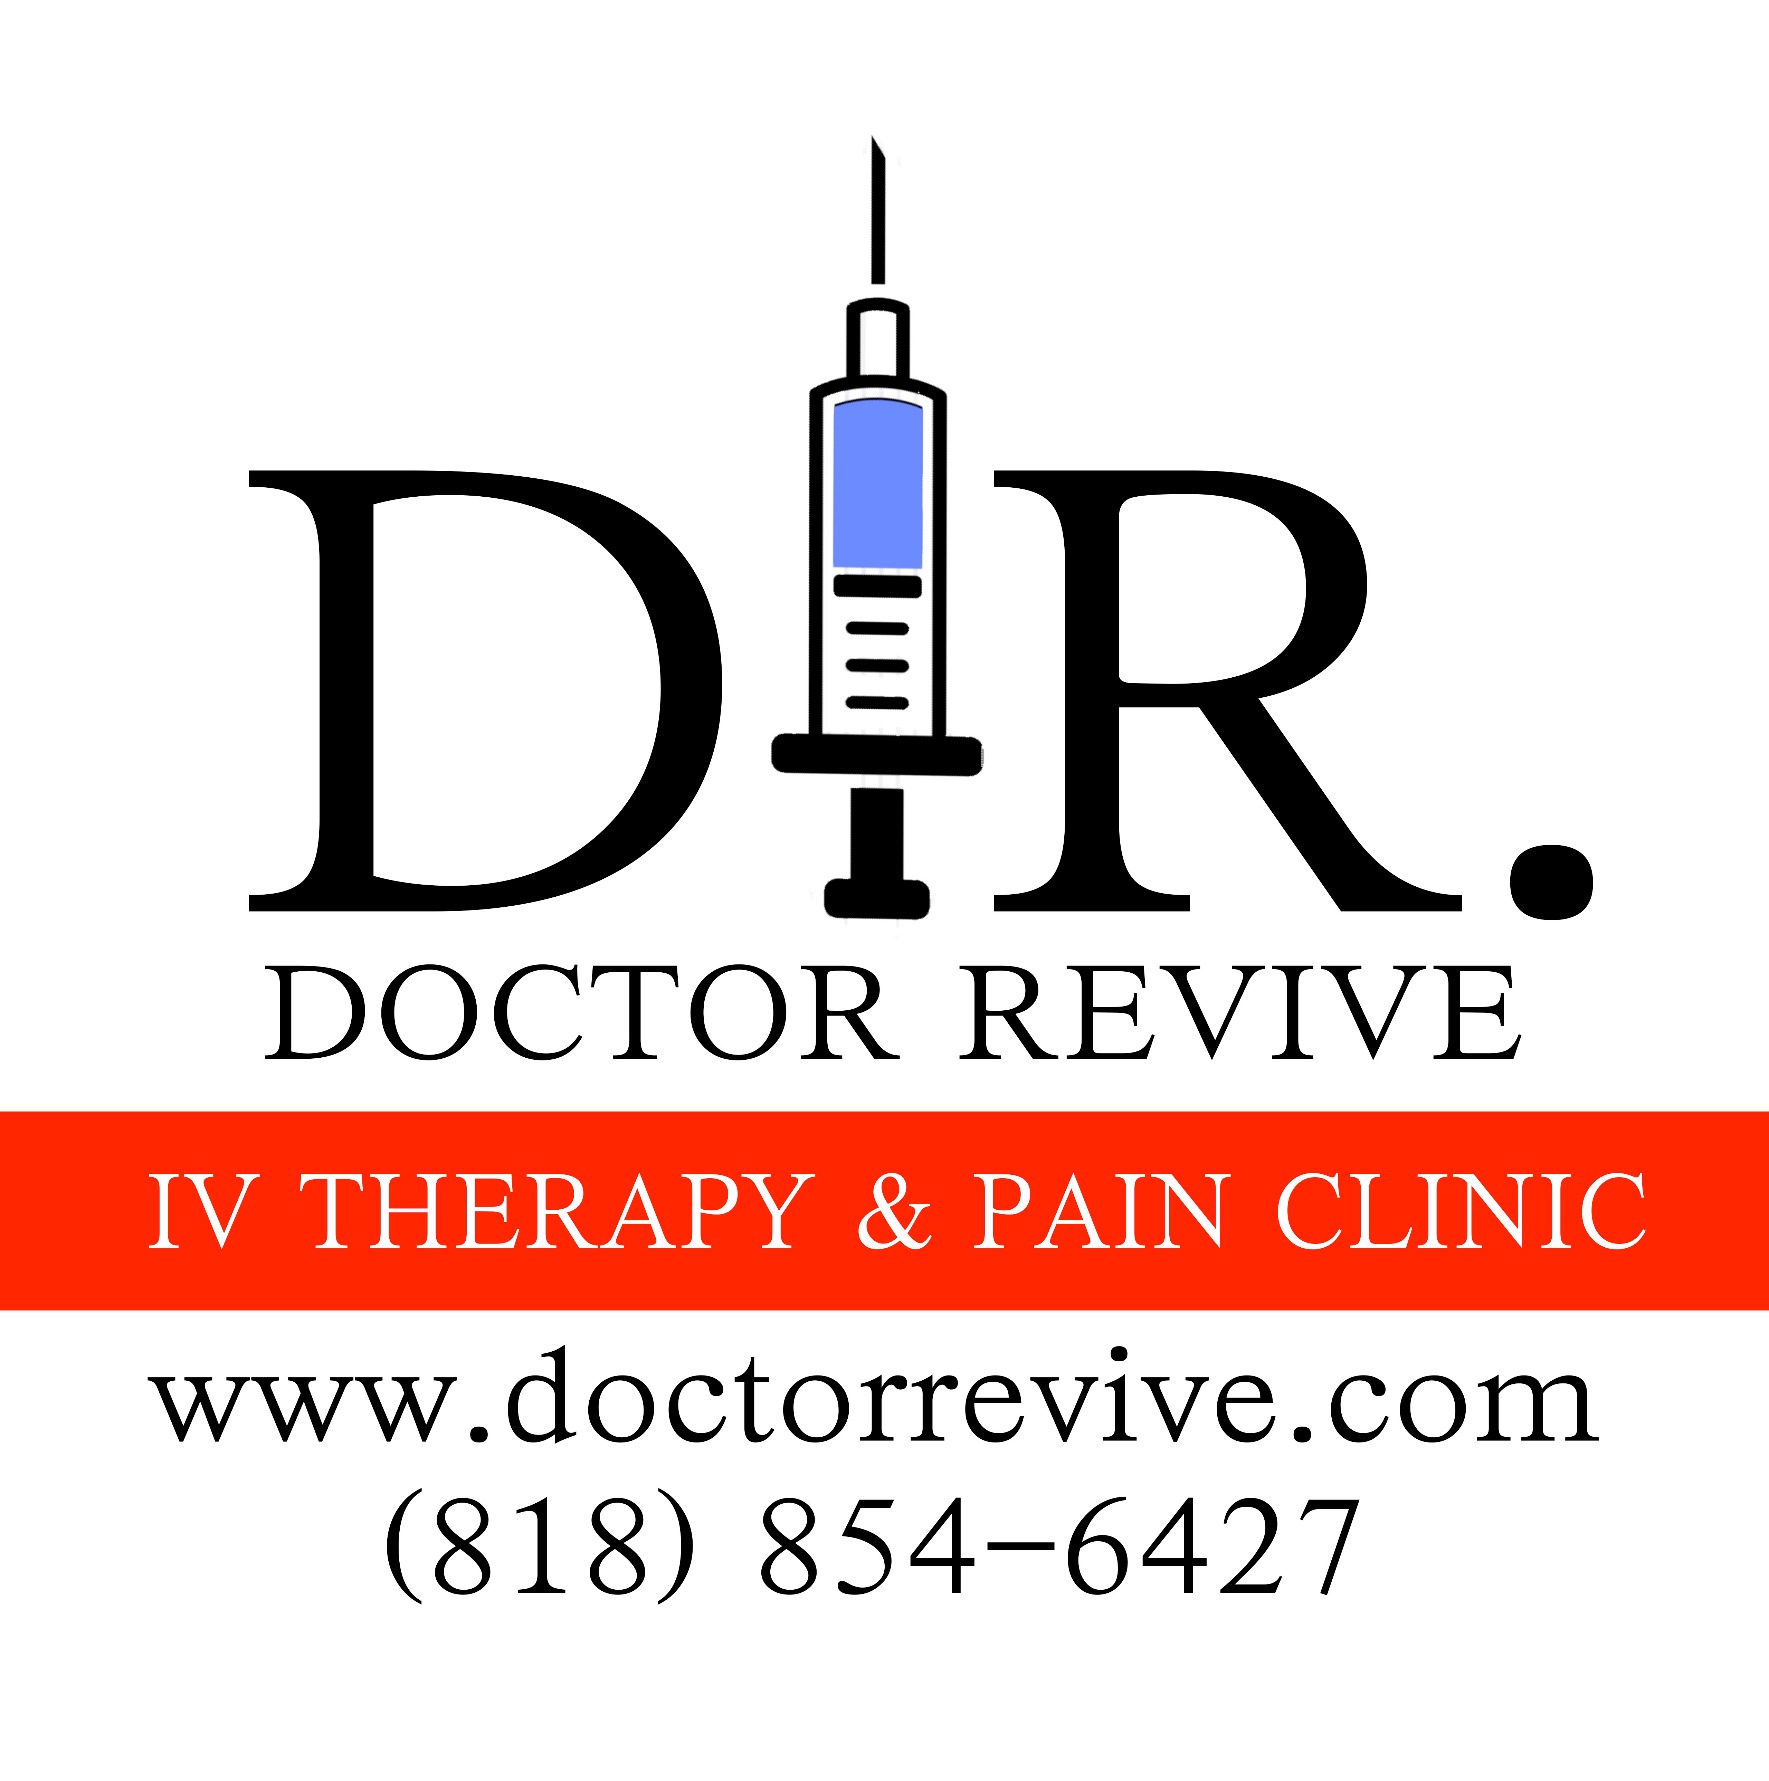 Dr. Revive IV Therapy & Pain Clinic